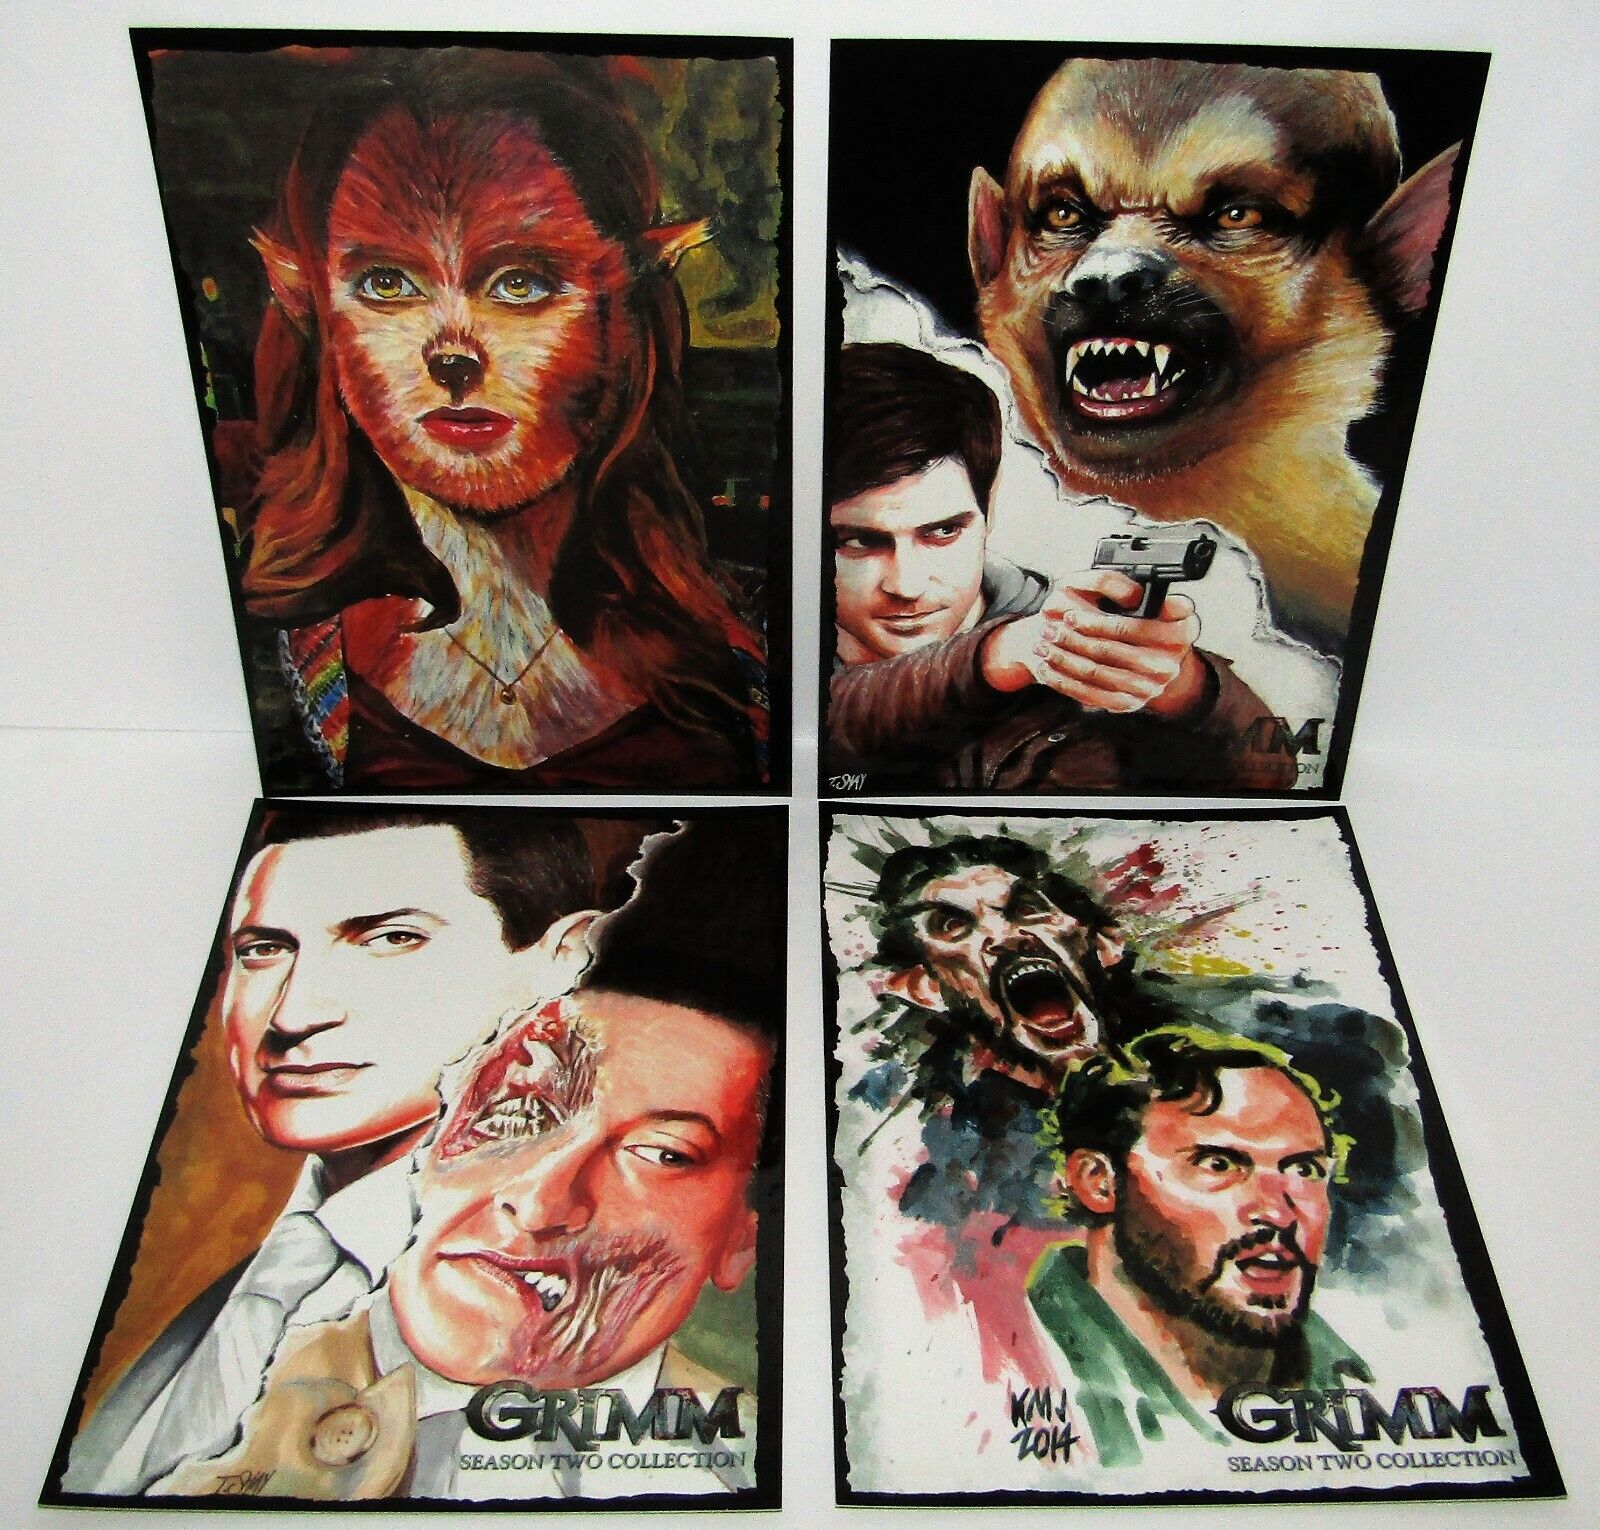 GRIMM SEASON 2 5X7 PROMO CARD MATCHING NUMBERED SET OF 4 ONLY 50 MADE #21 OF 50